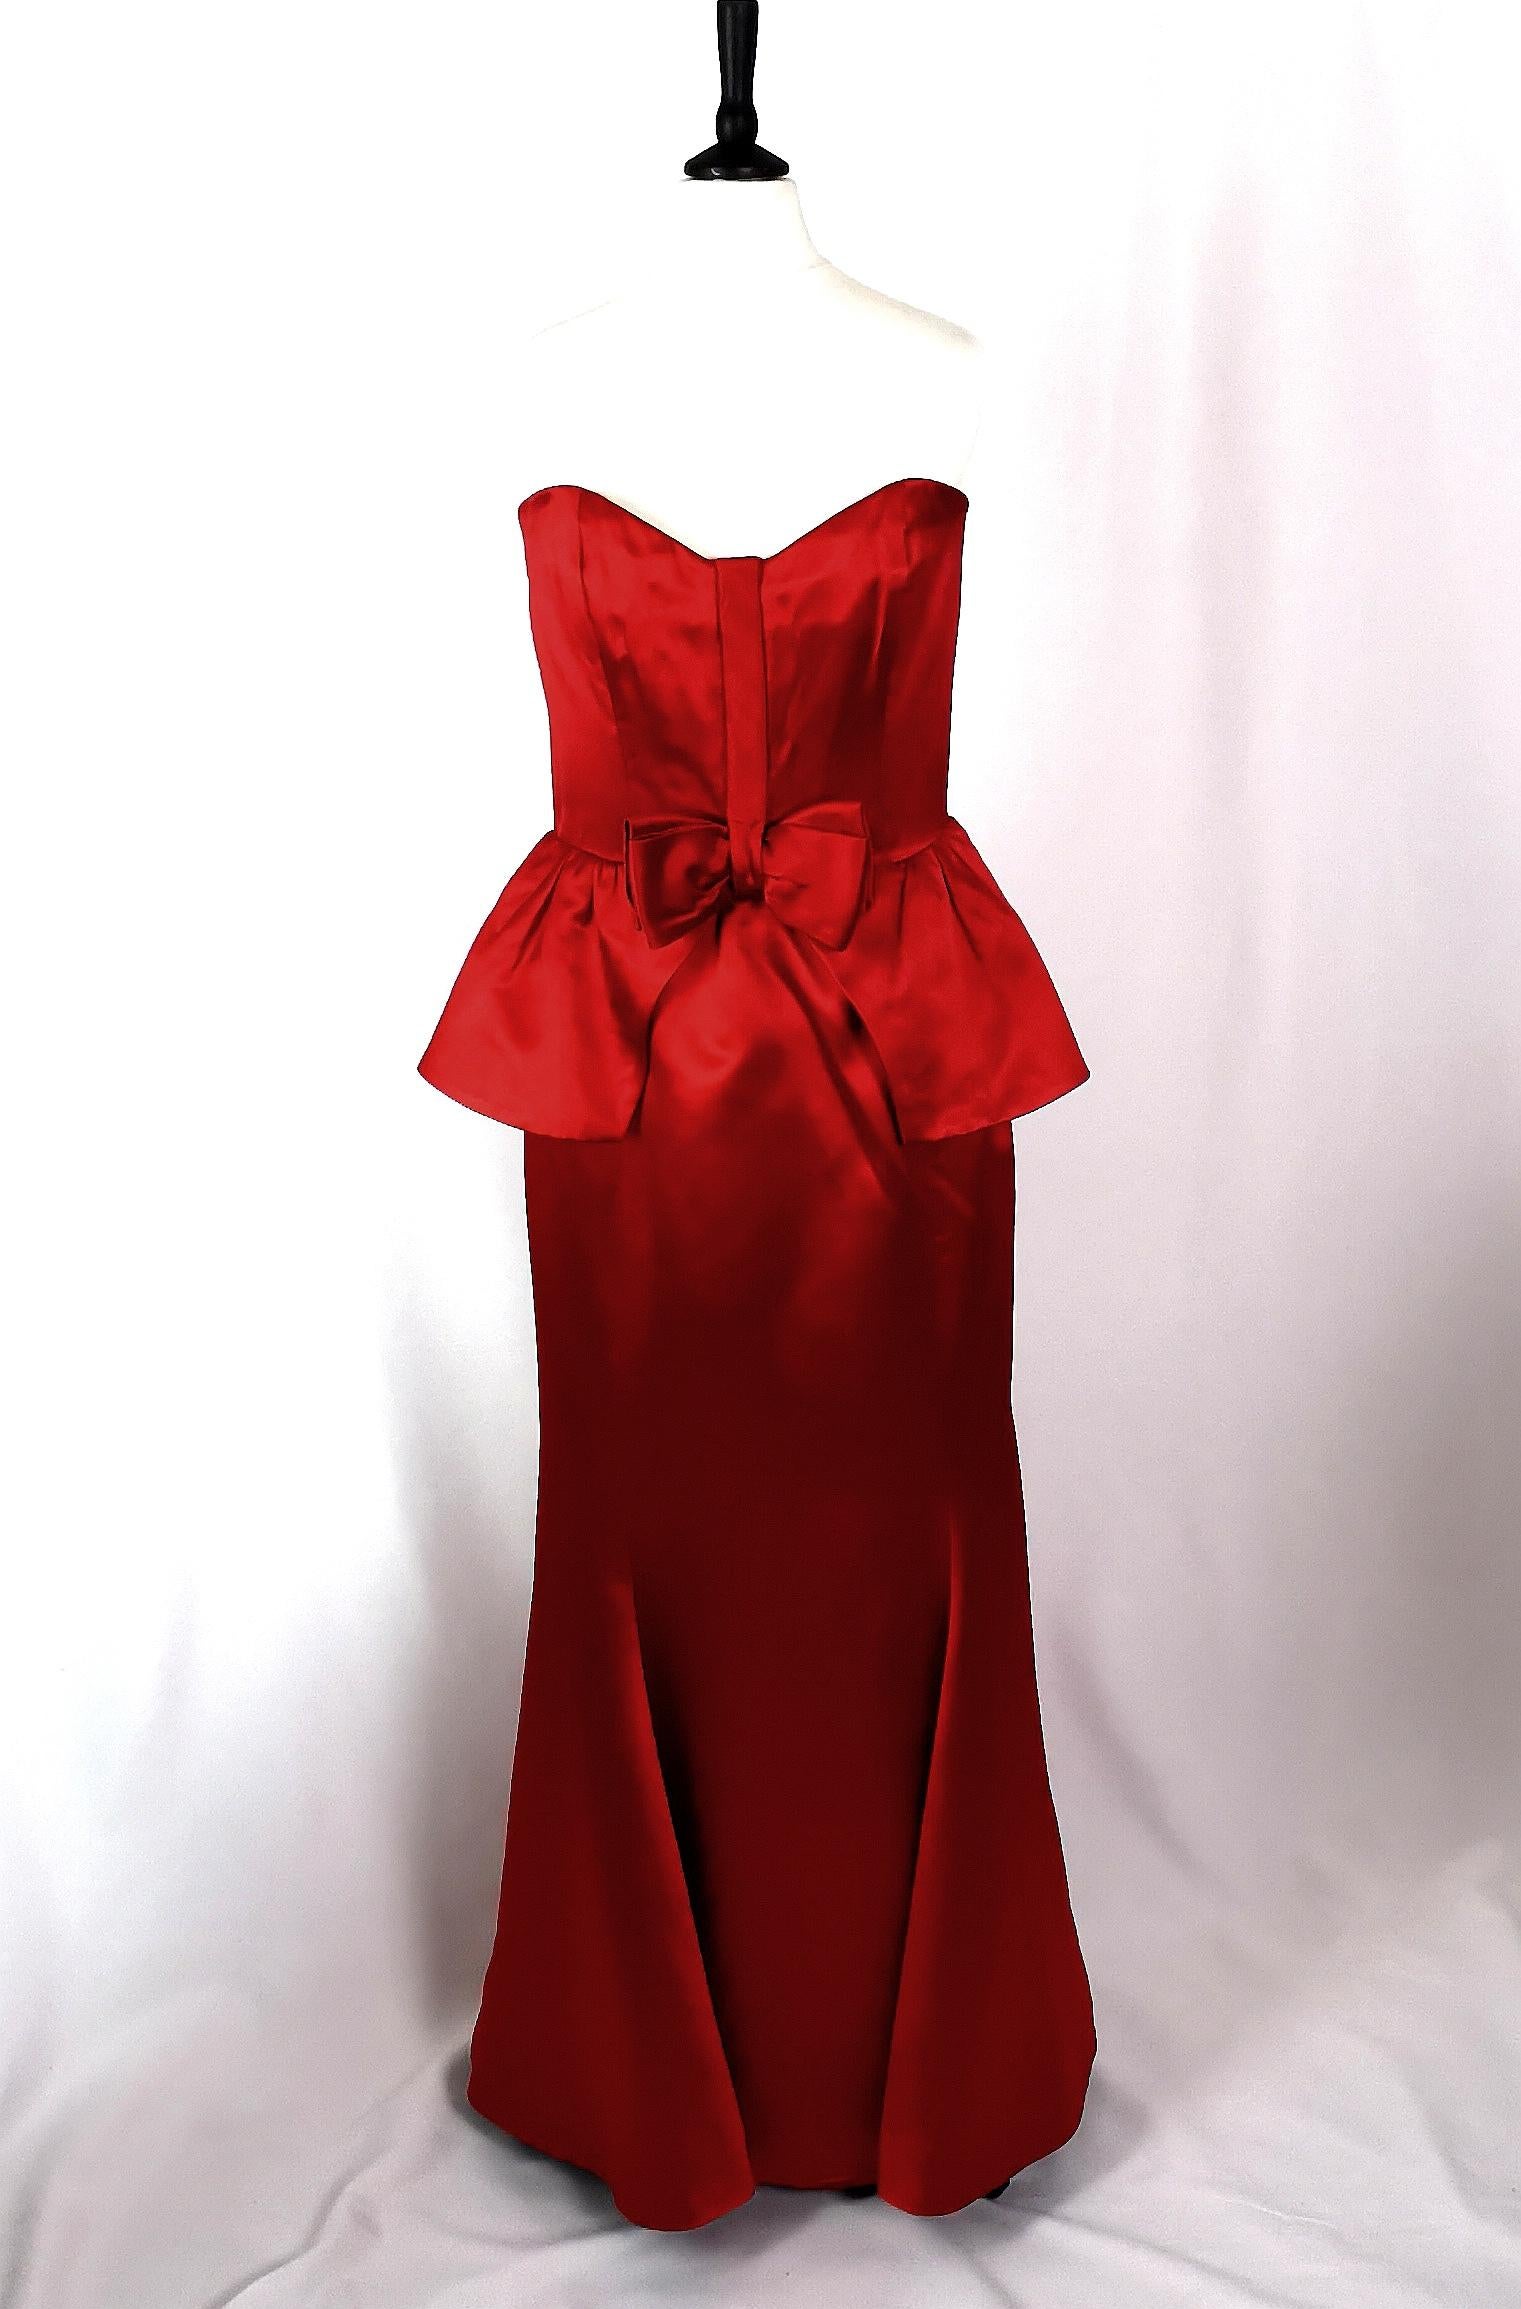 A truly magnificent vintage Valentino Boutique red satin ball gown dress.

This is a strapless and sleeveless dress with long flowing skirts with a slight pleat design, making this the perfect dress for making an entrance, it has a fitted bodice